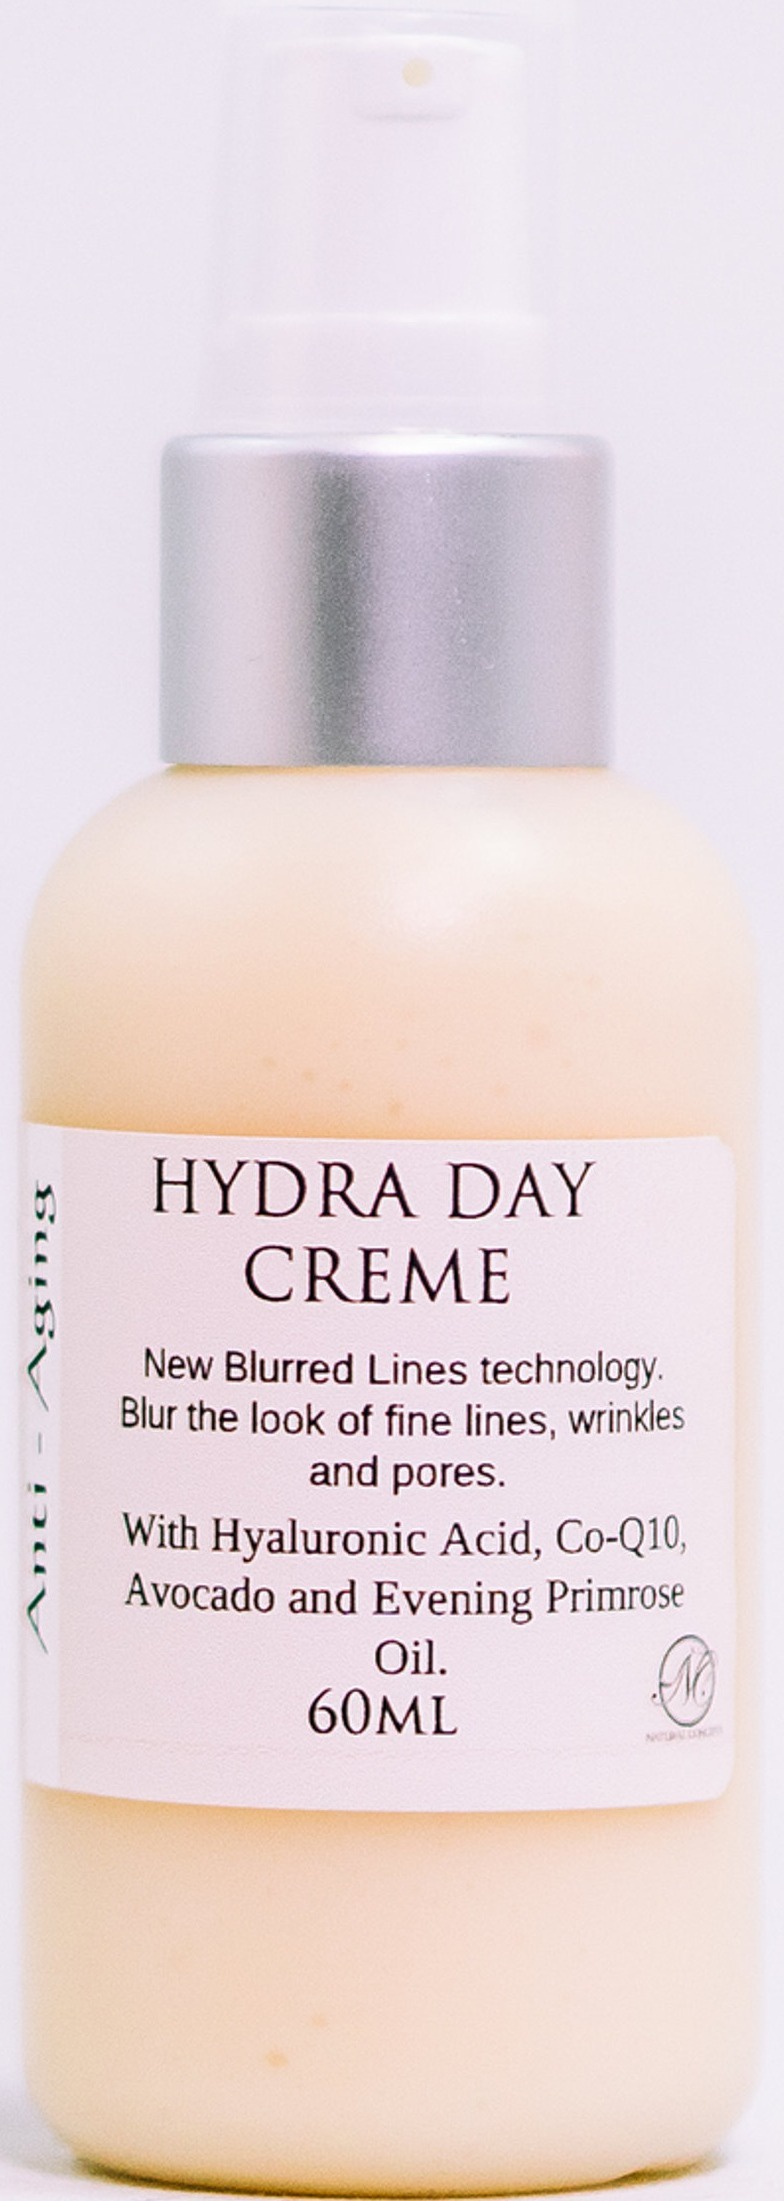 Natural Concepts Hydra Day Creme With COQ10 & Hyaluronic Acid